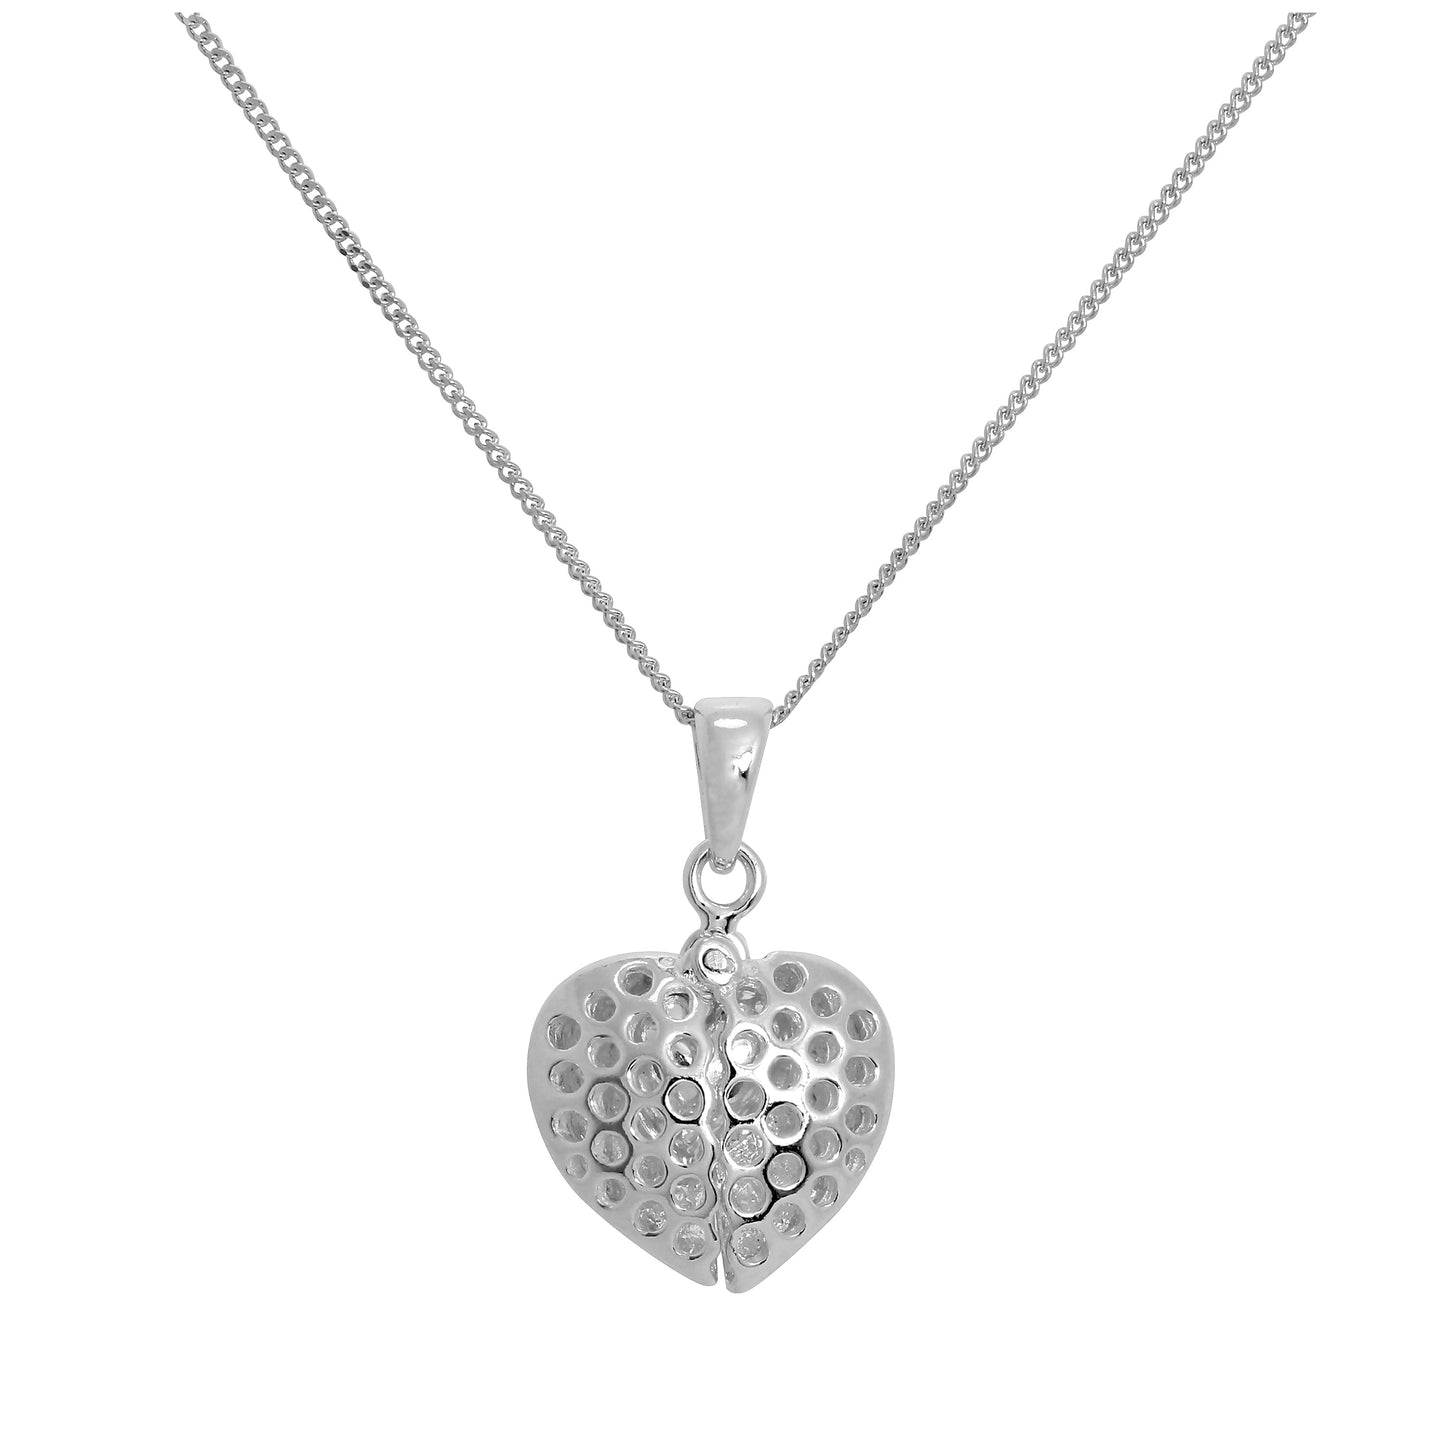 Sterling Silver Opening Heart Pendant with Little Heart Inside on Chain 14 - 32 Inches